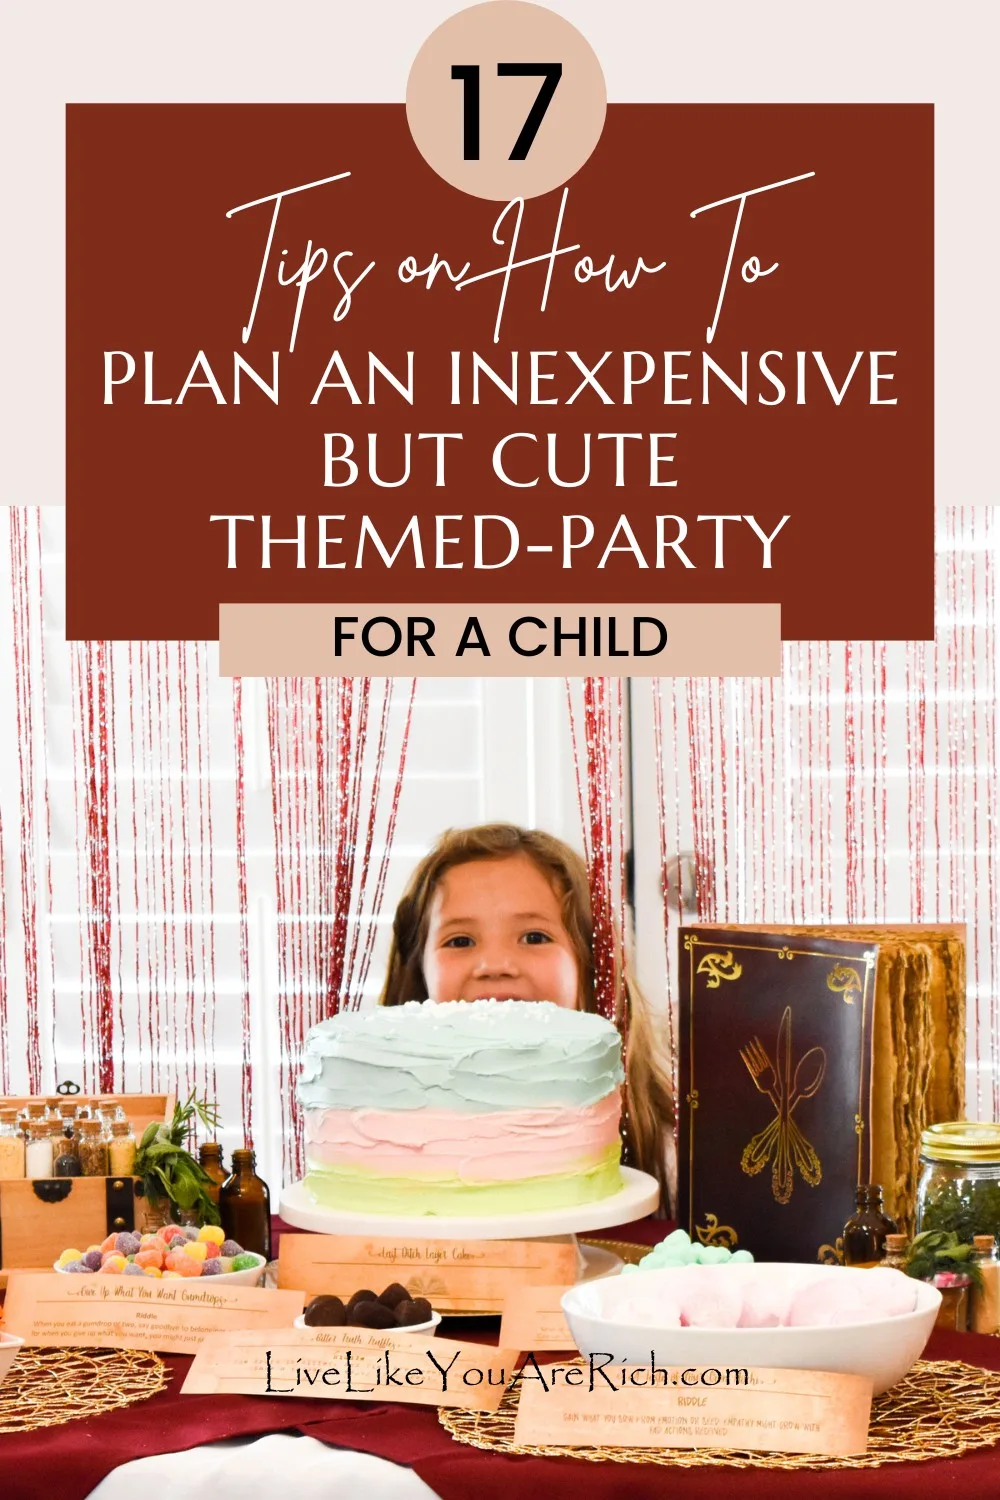 17 Tips on How to Plan an Inexpensive but Cute Themed-Party for a Child